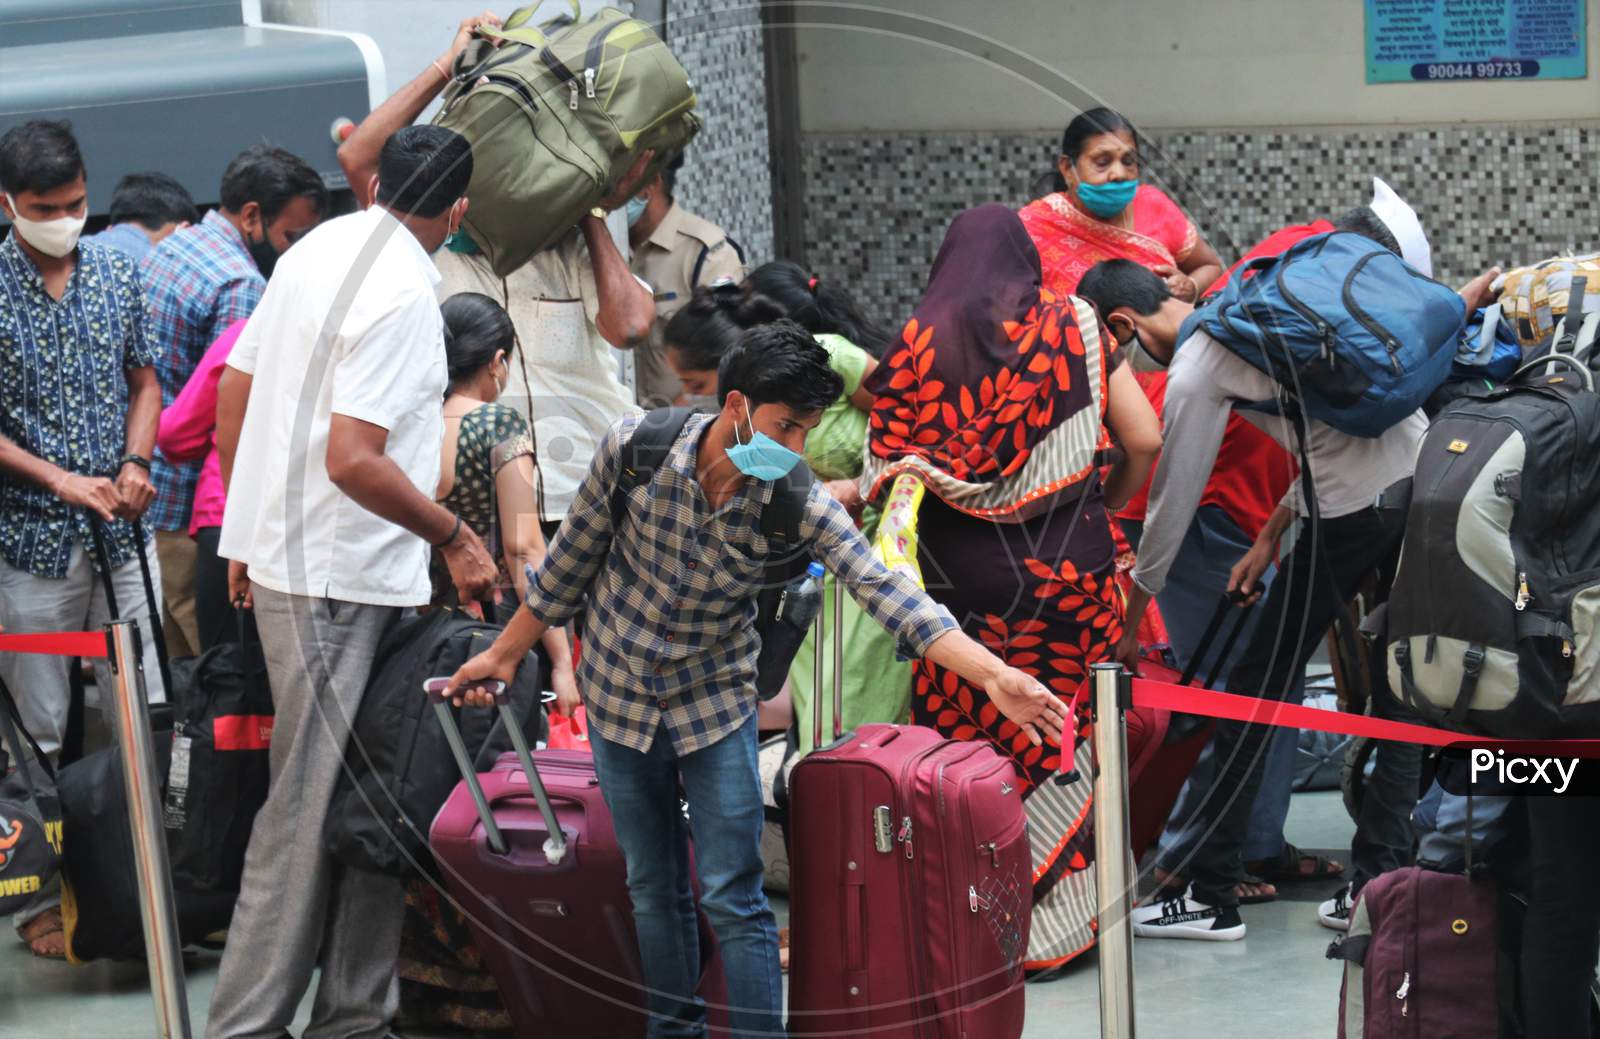 People wearing protective masks arrive at a railway station, amid the spread of the coronavirus disease (COVID-19), in Mumbai, India, November, 2020.